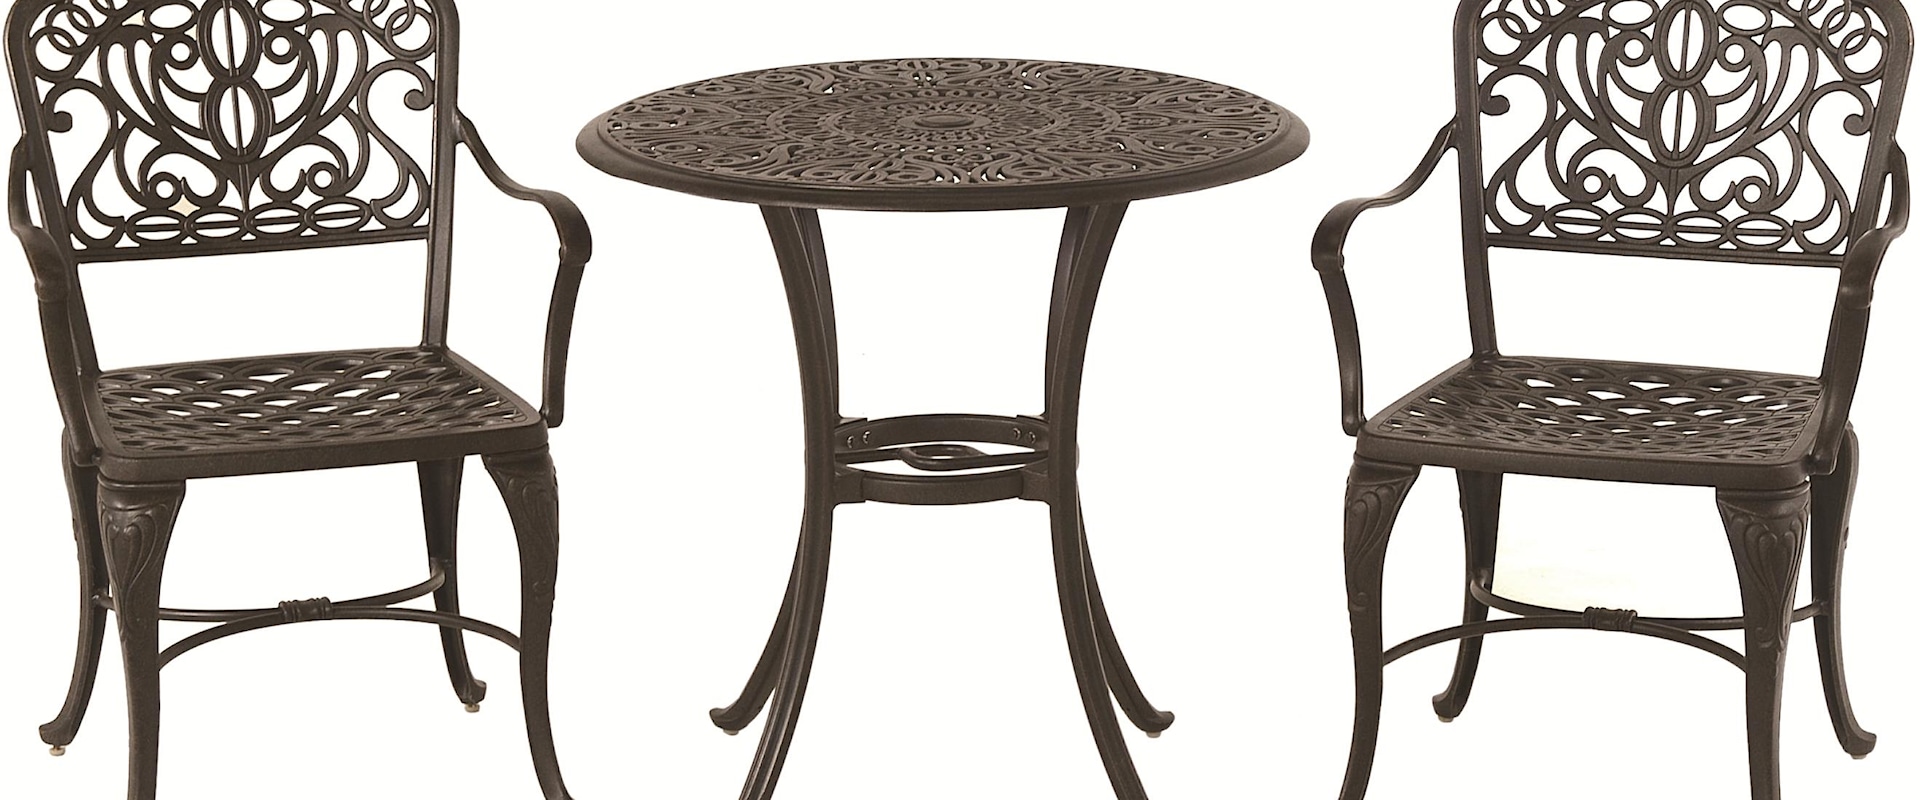 3-Piece Bistro Set with Ornate Casting and Detailed Legs